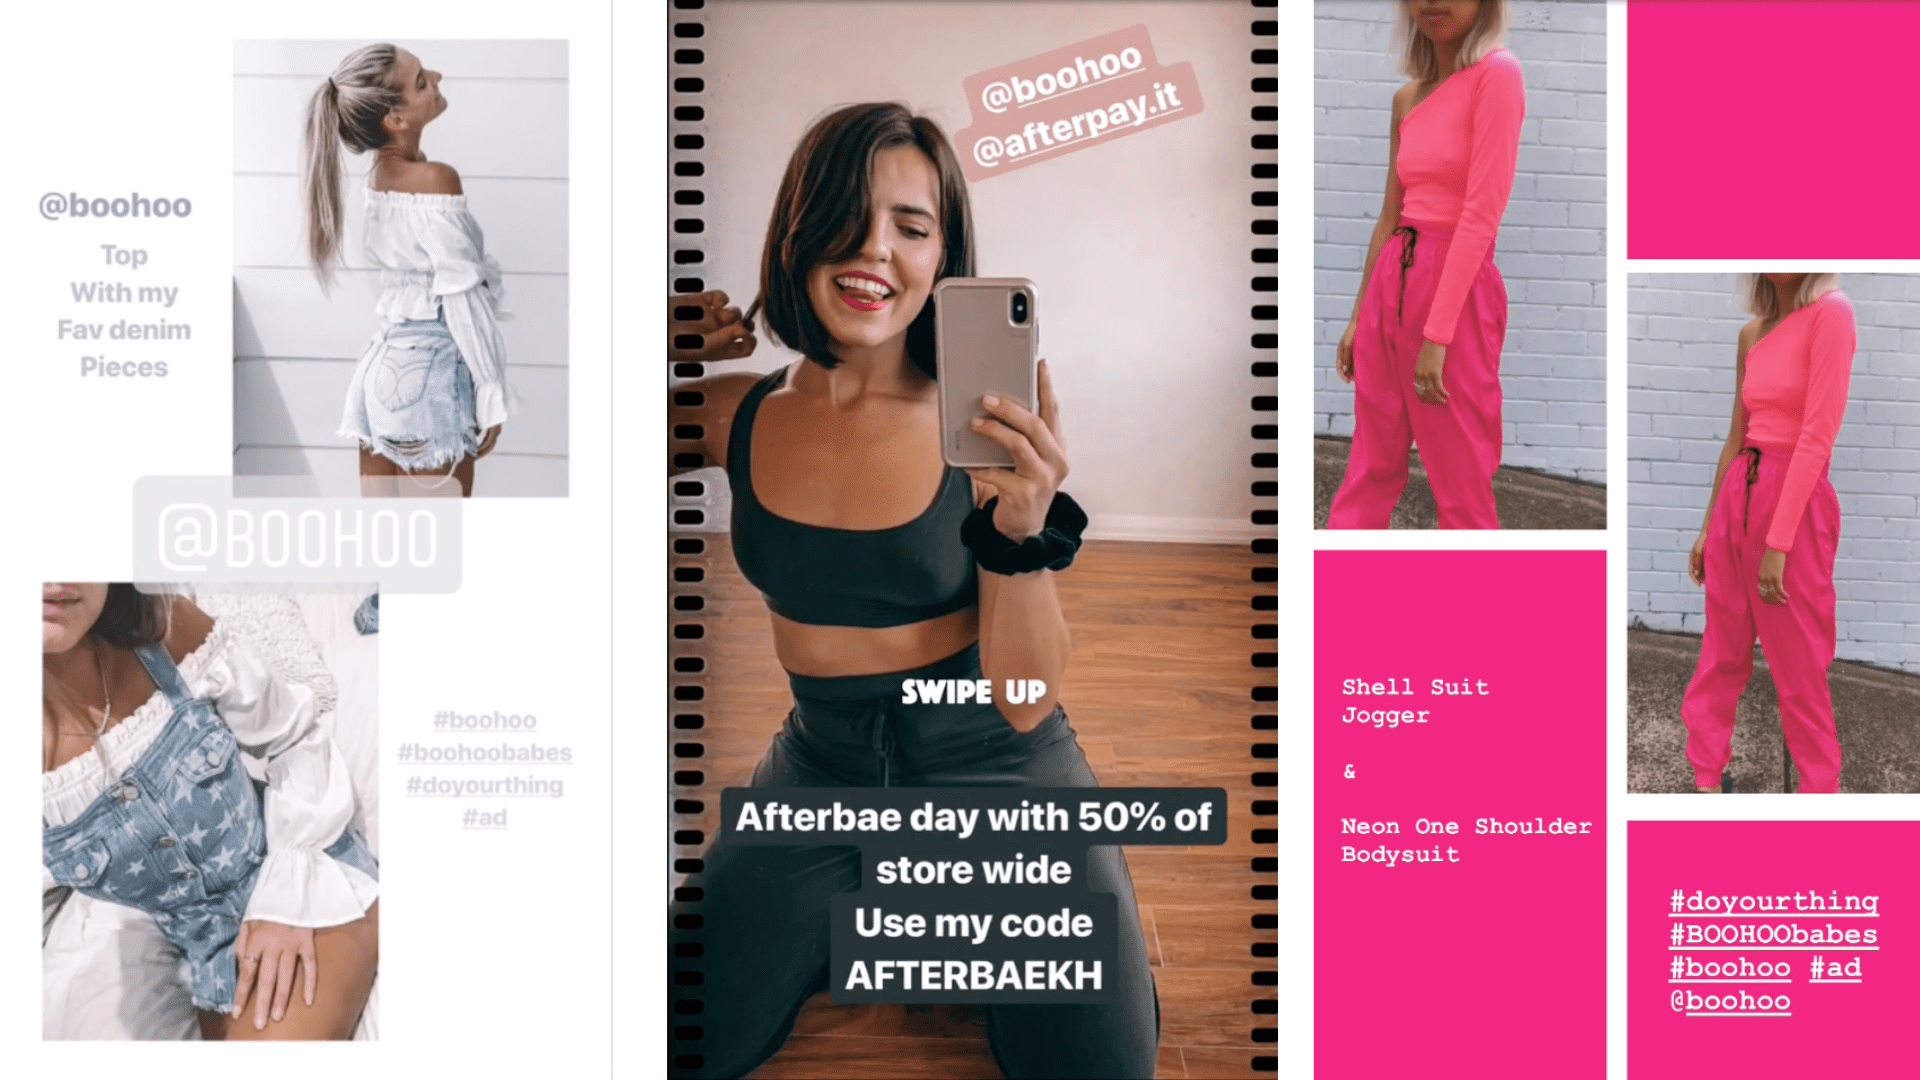 How brands can succeed with Instagram Stories